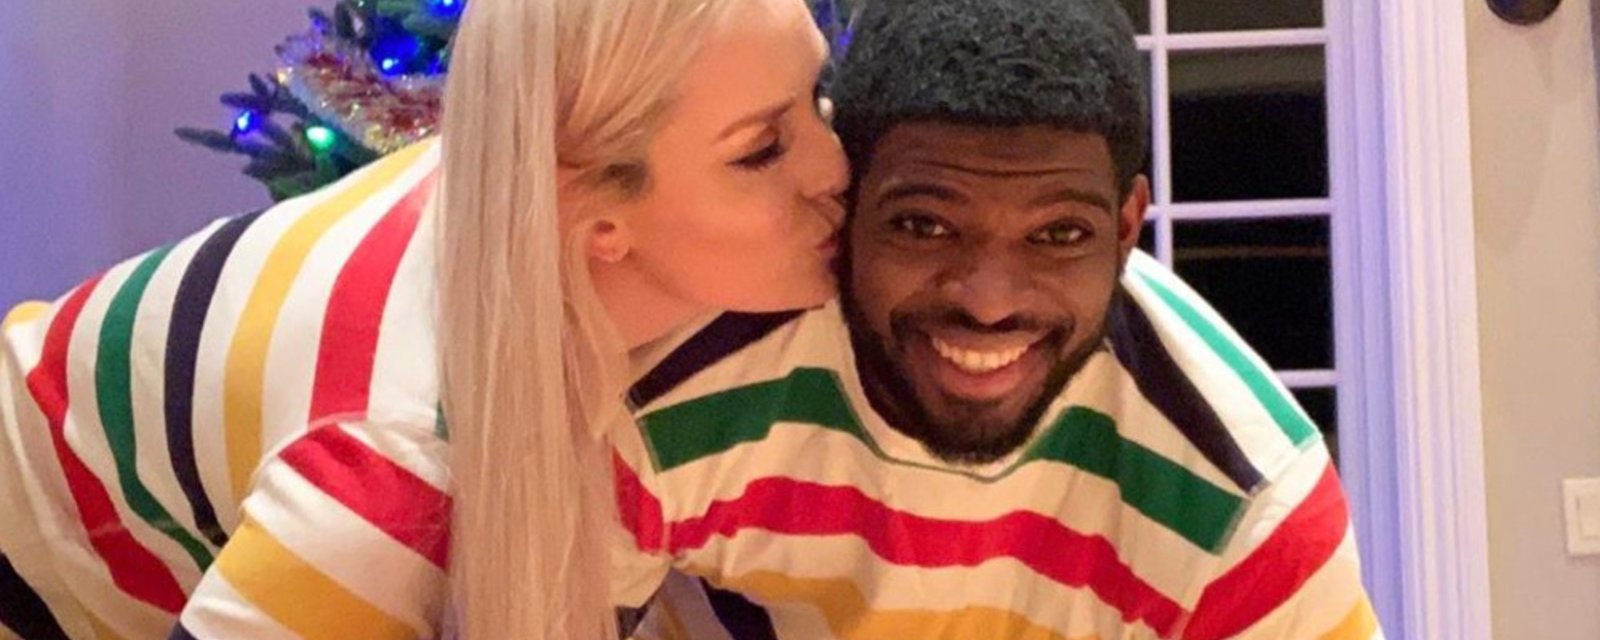 Subban shares a hot picture of Lindsay Vonn in a bikini! 